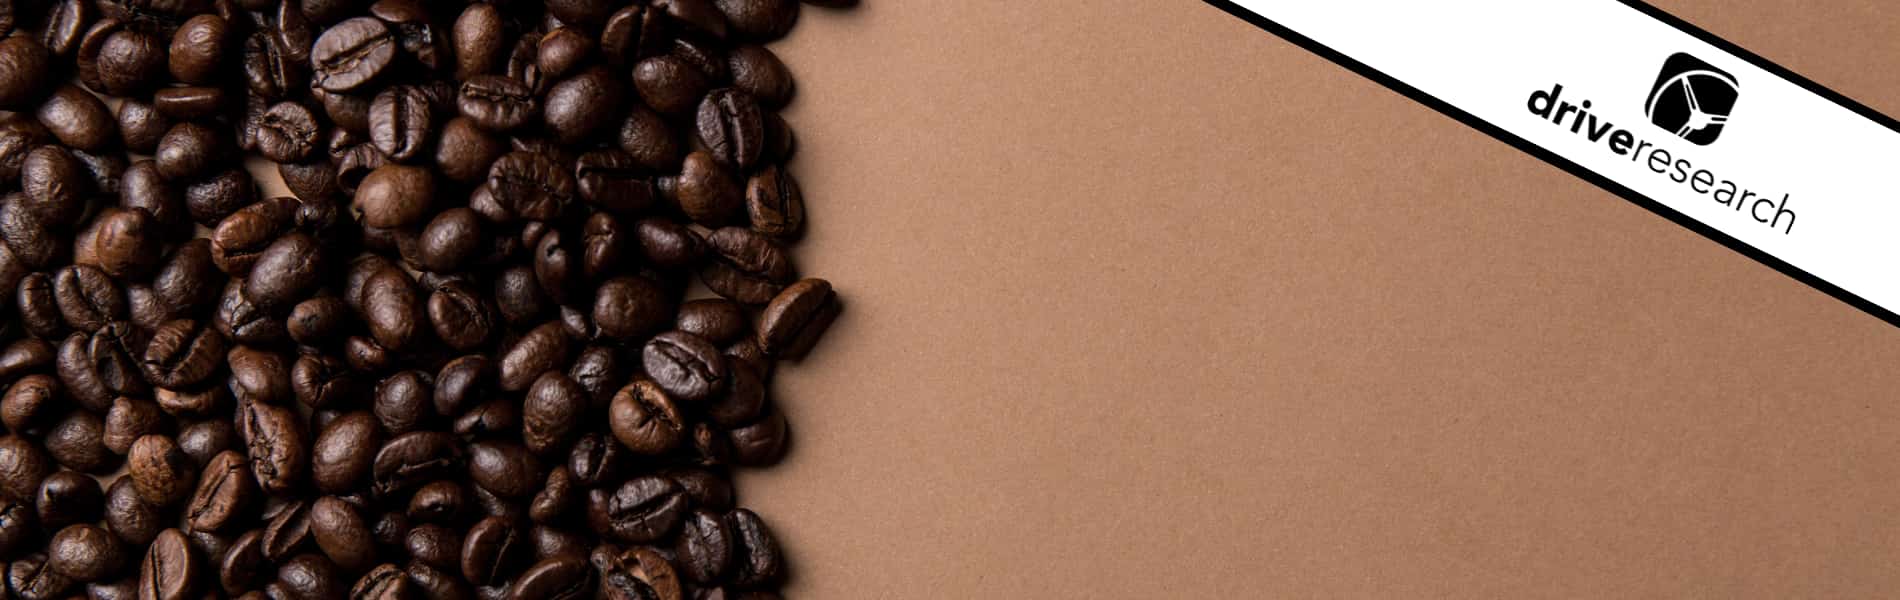 The History of Coffee: 8 Stimulating Facts